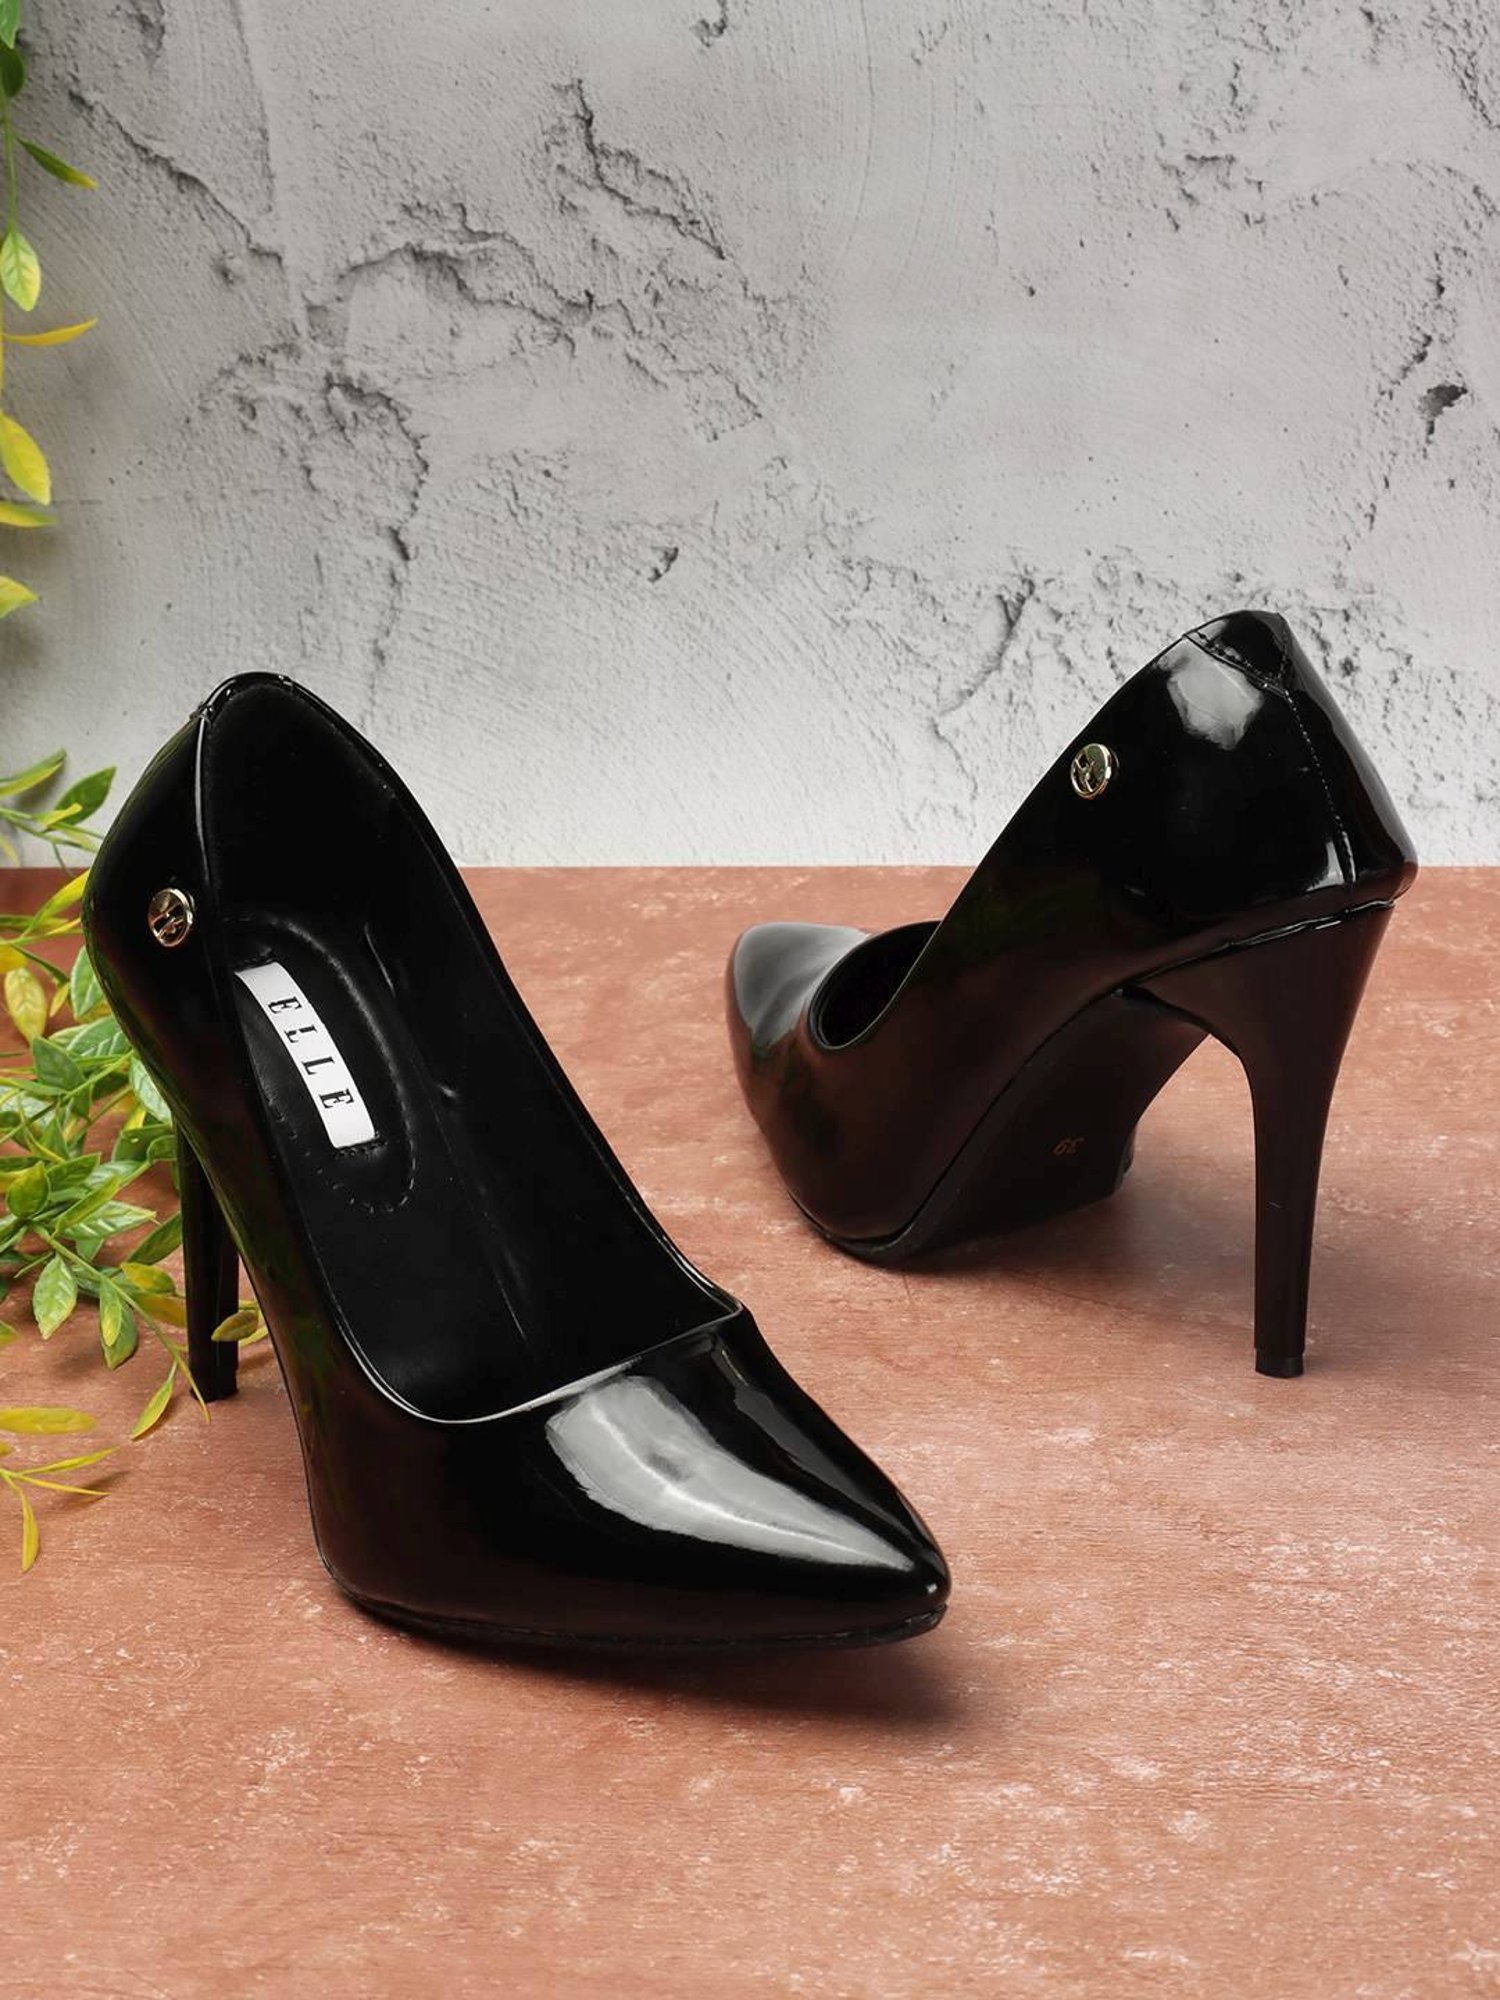 No Doubt Tulissa Pointed Toe Heels in Black | iCLOTHING - iCLOTHING